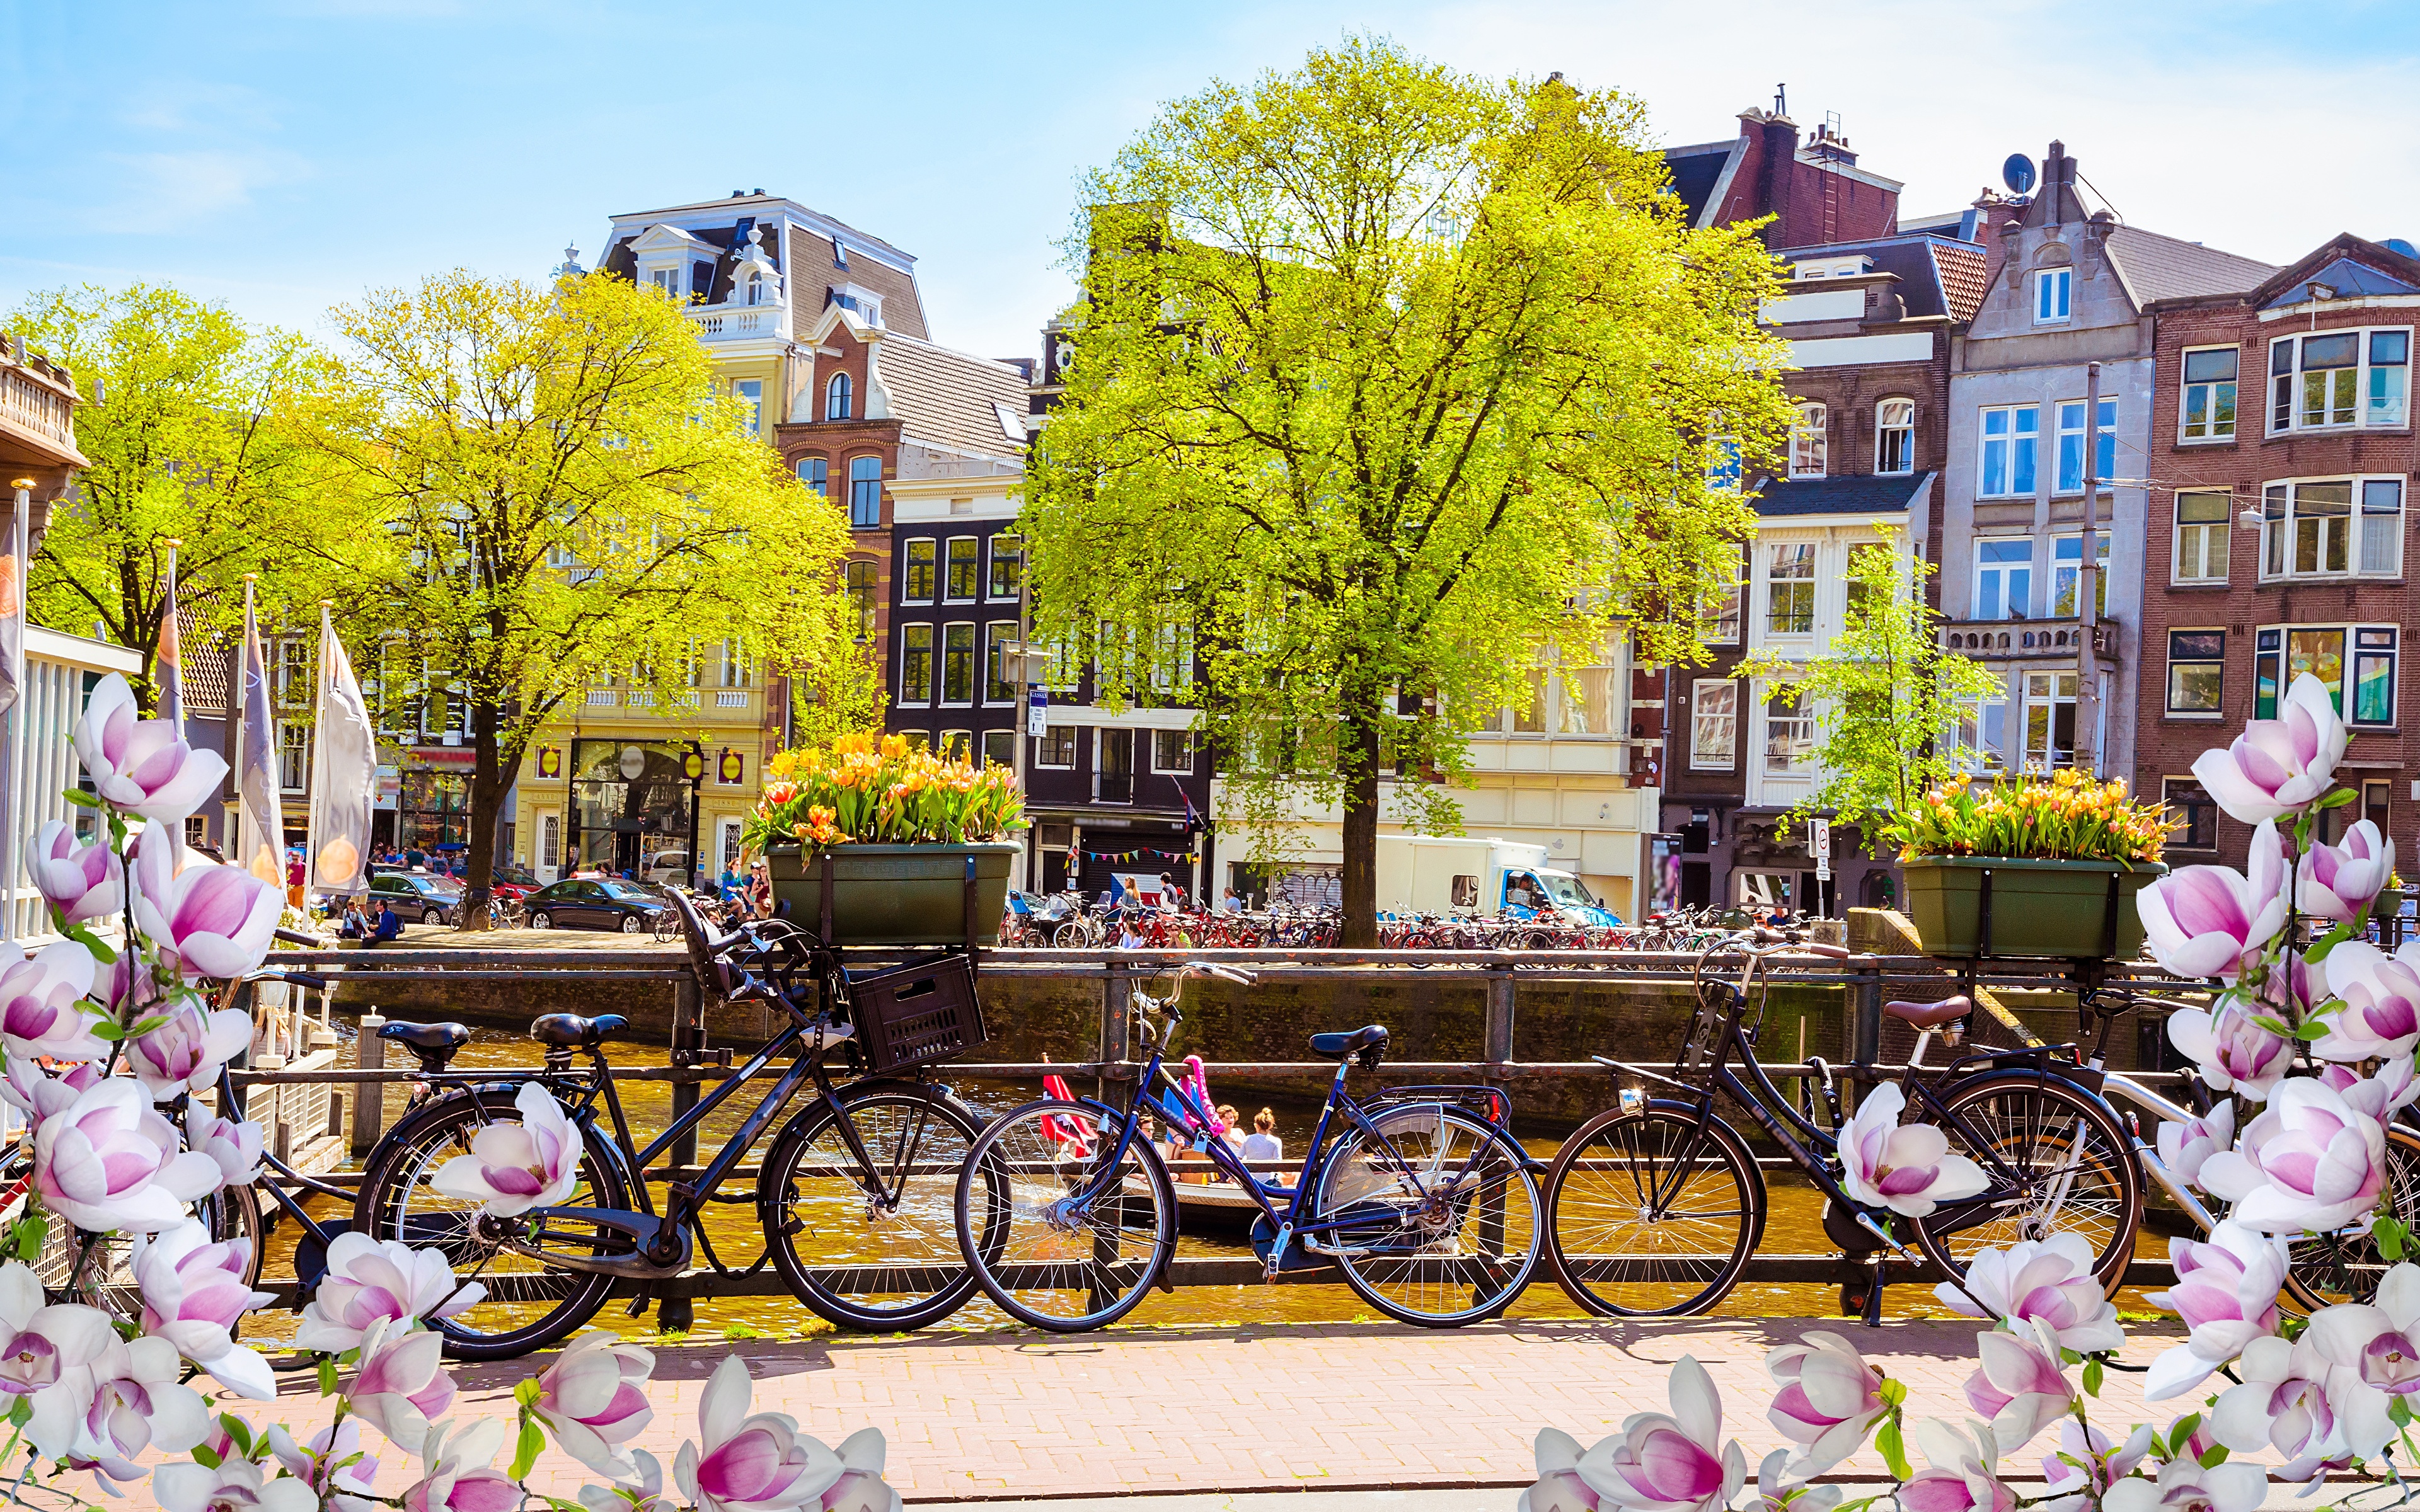 500 Amsterdam Pictures  Download Free Images on Unsplash